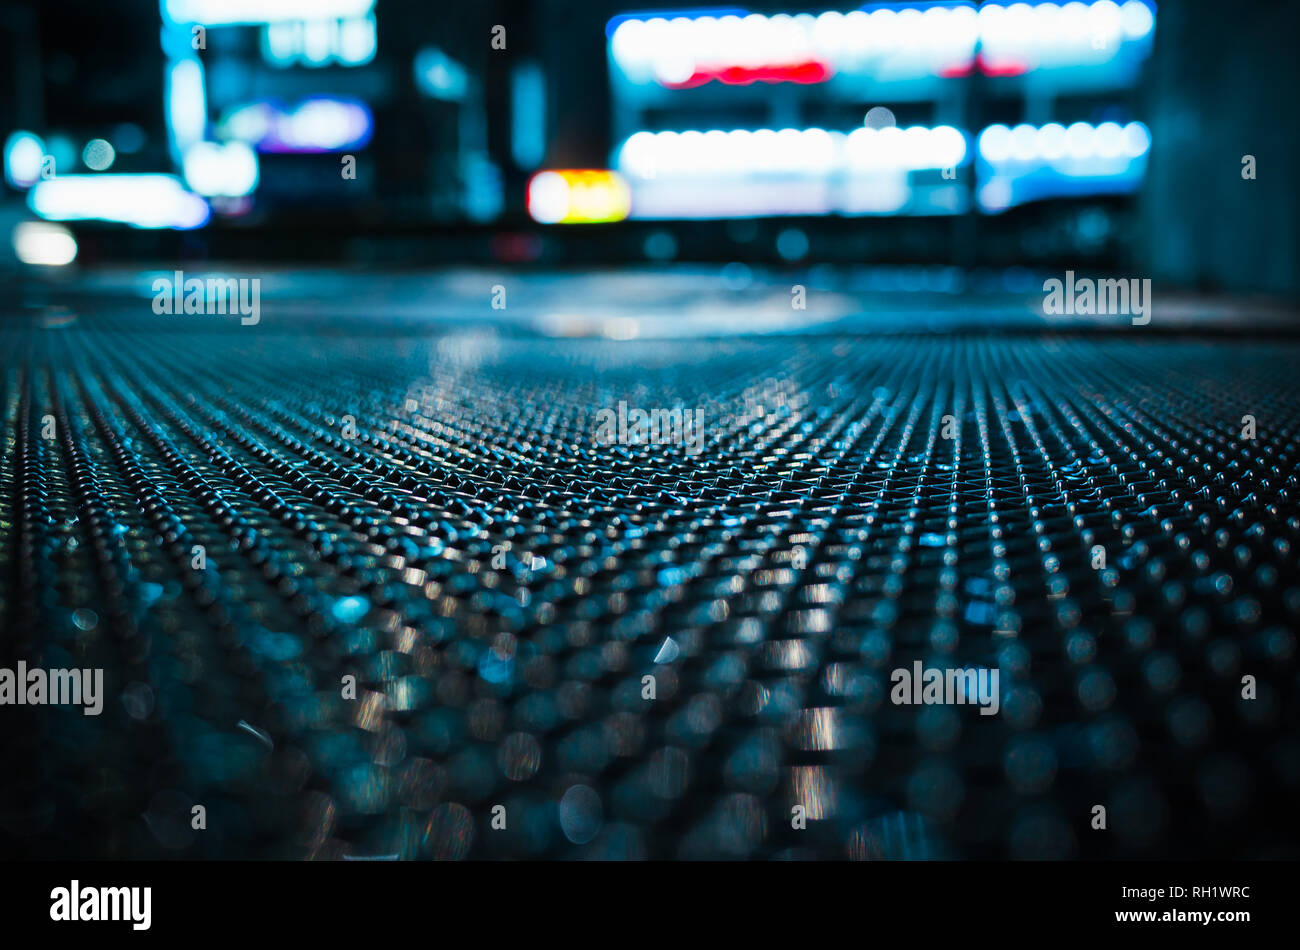 Abstract night city background with wet street sewer grate on urban road, close-up photo with selective focus Stock Photo